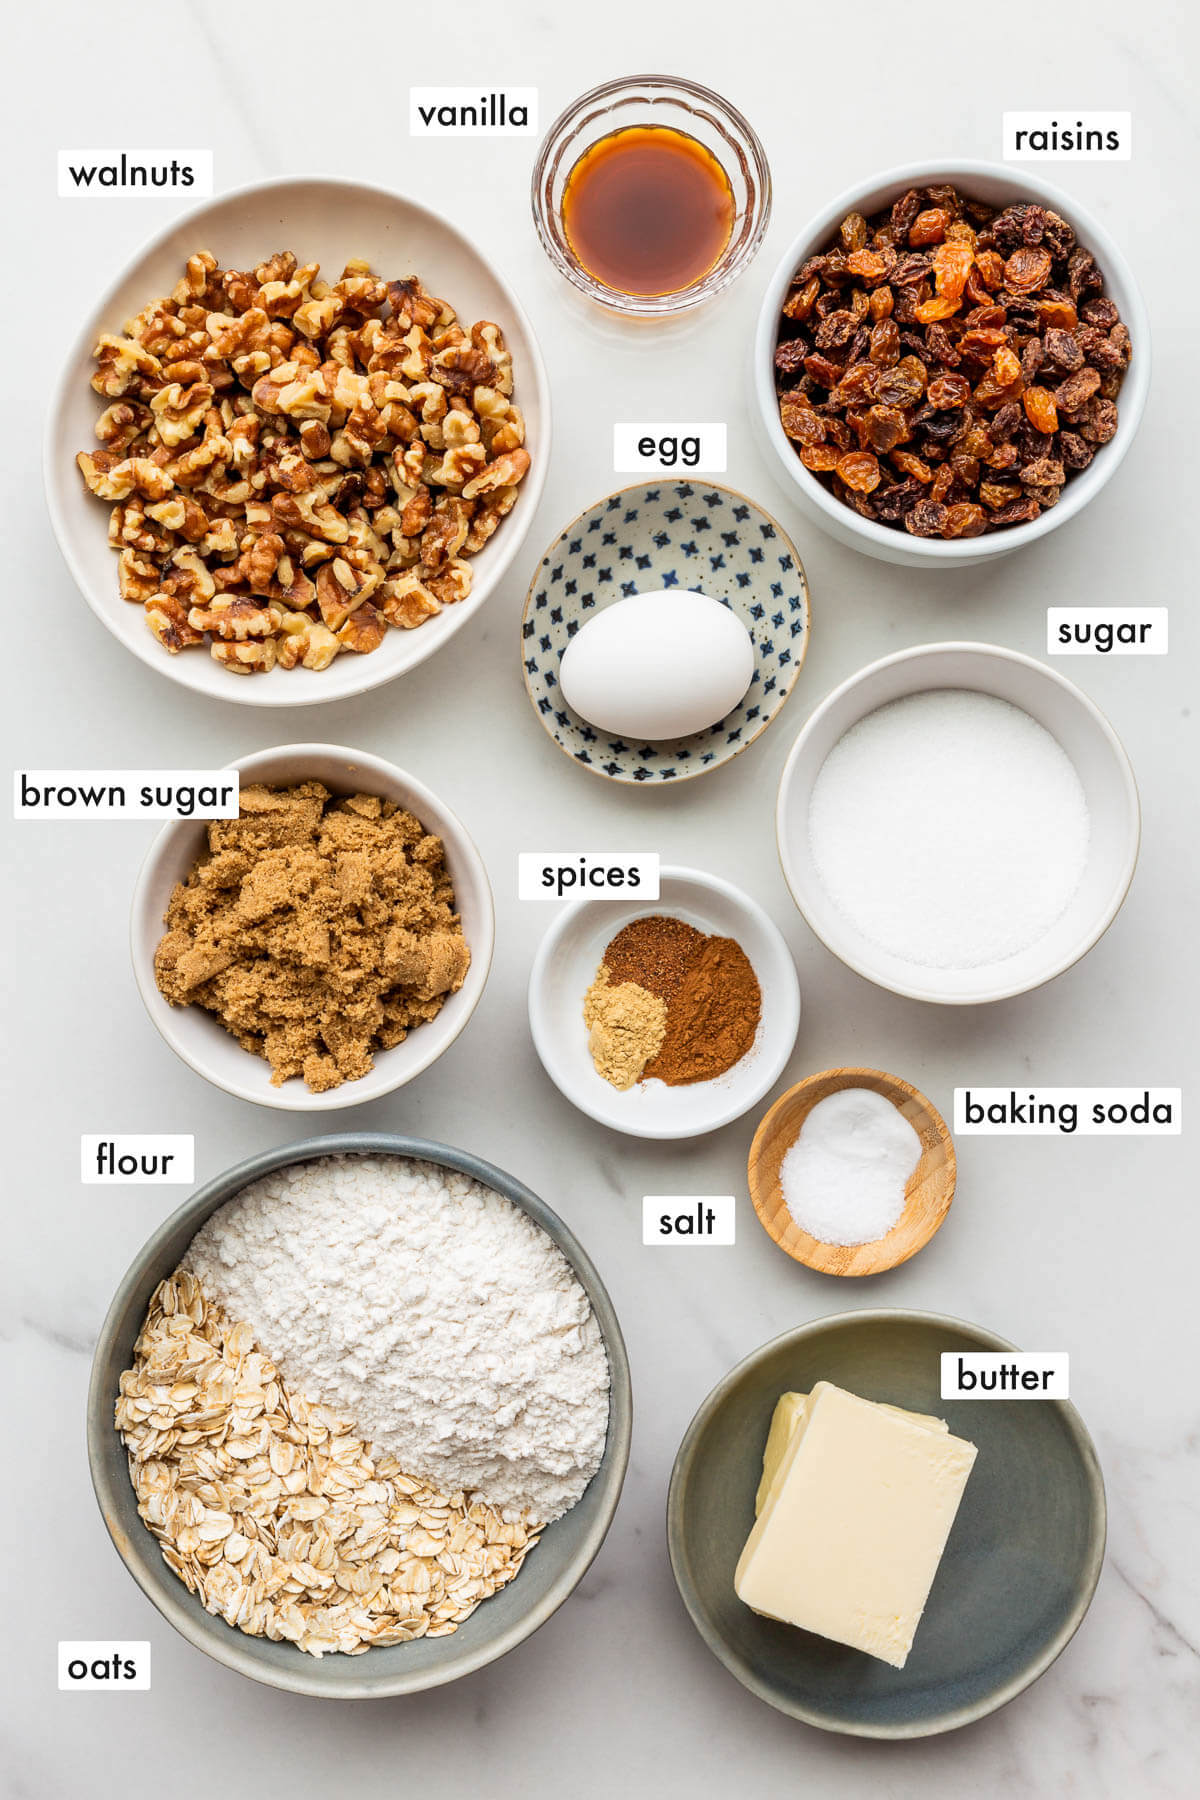 Ingredients to make oatmeal raisin cookies with walnuts laid out and ready to bake with.